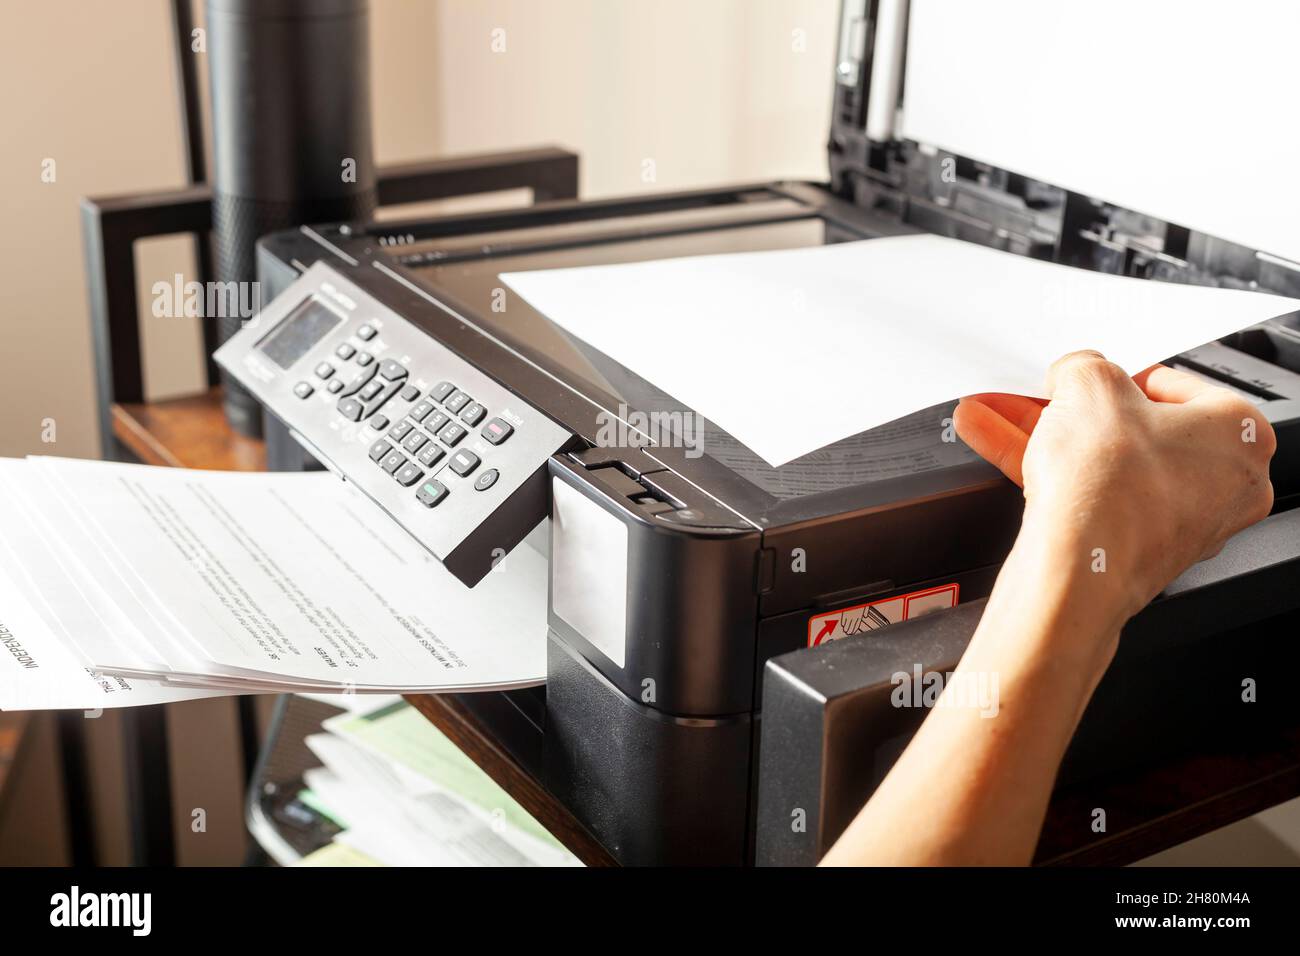 Concept image for office work. A woman is placing or removing paper. There is a wireless photocopier, scanner, printer combo device on top of a shelvi Stock Photo